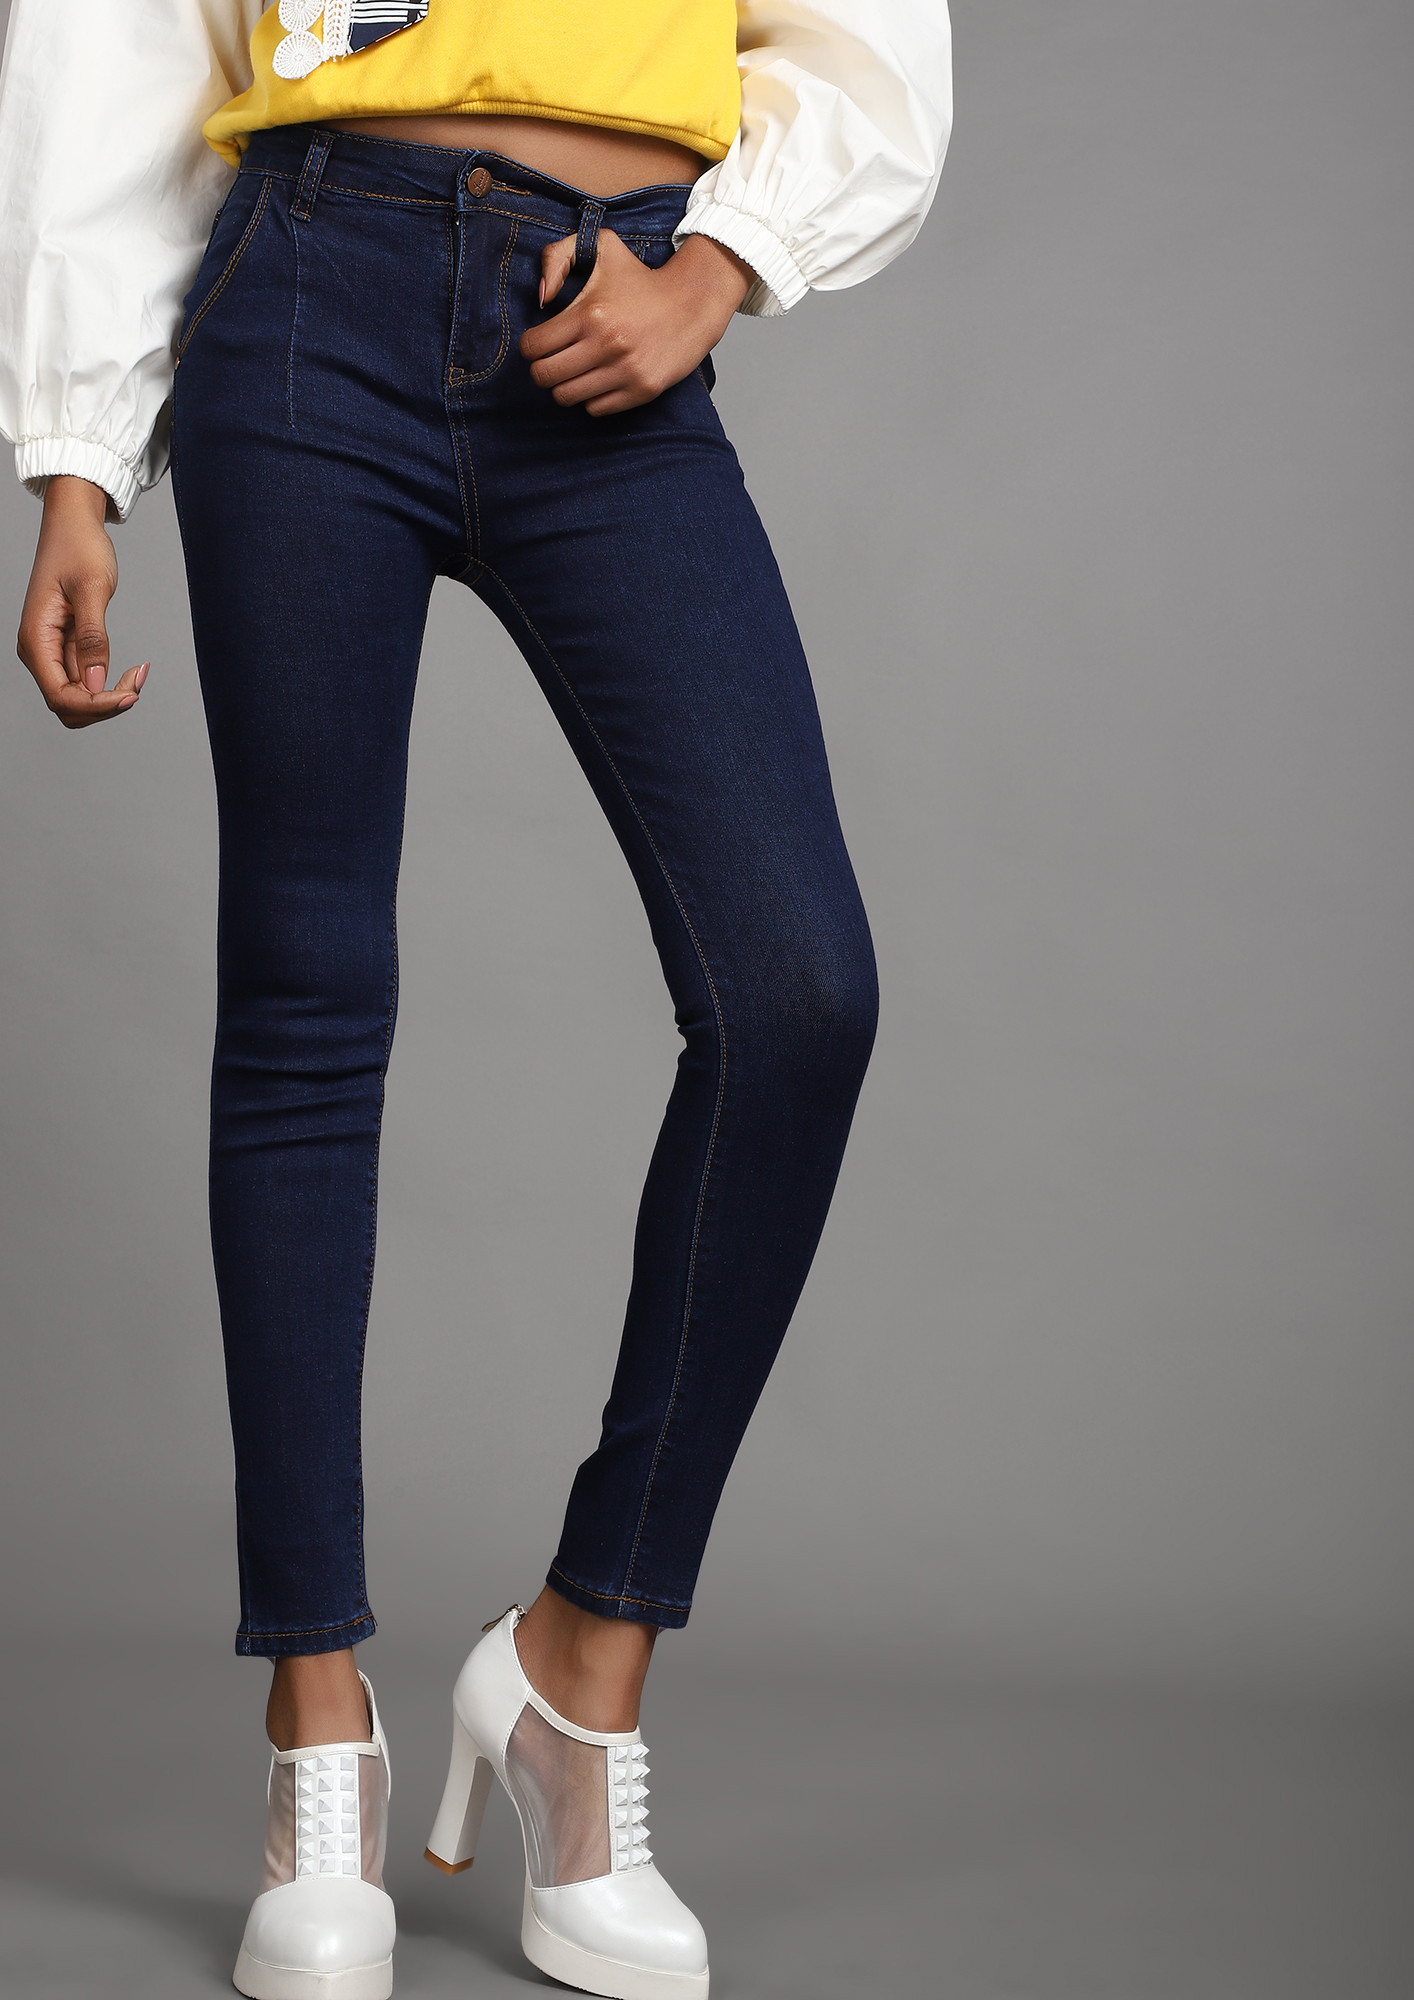 From Fit To Fitter Blue Skinny Jeans